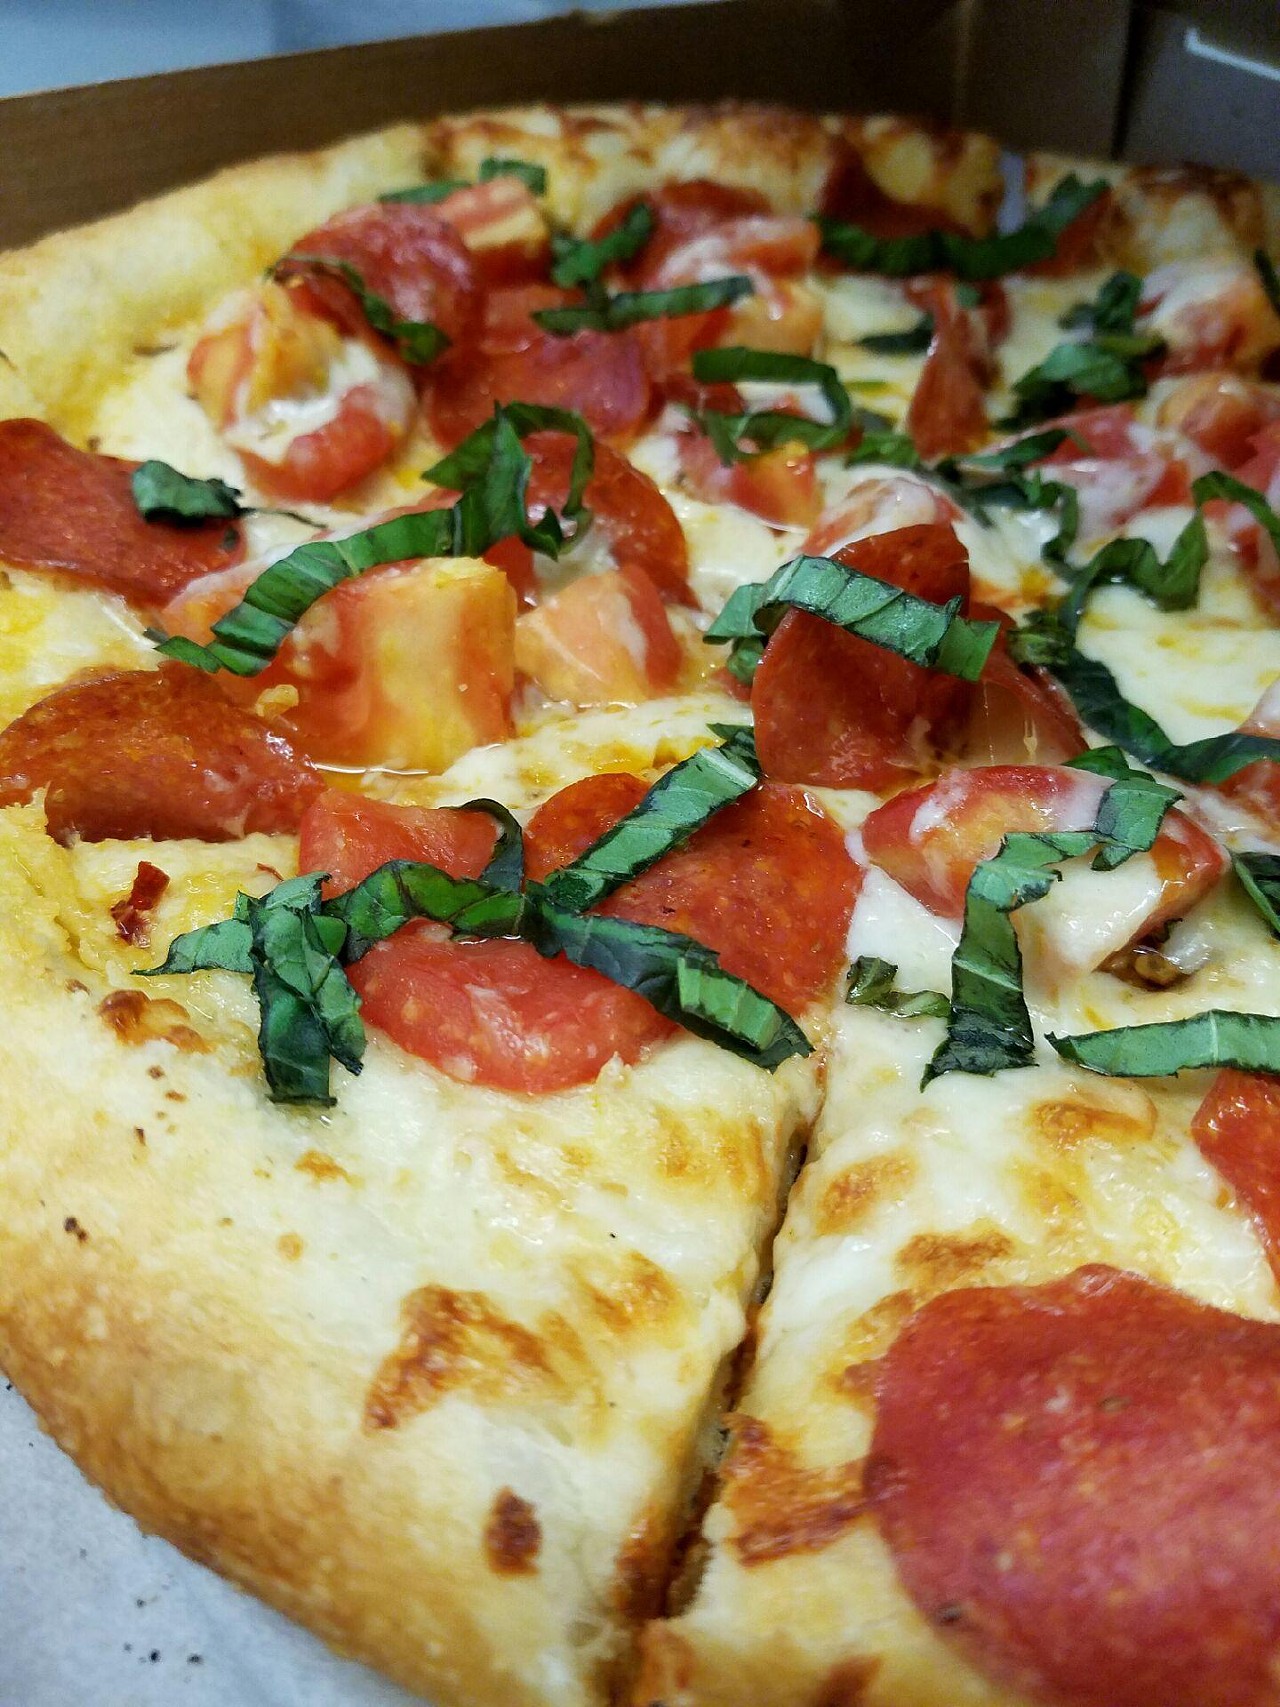  Crust
2258 Professor Ave., Cleveland
Crust is offering their 12 inch hot margherita pepperoni pizza with chopped garlic, crushed red pepper, tomato, smoked mozzarella, pepperoni & basil. Vegan and vegetarian options available.